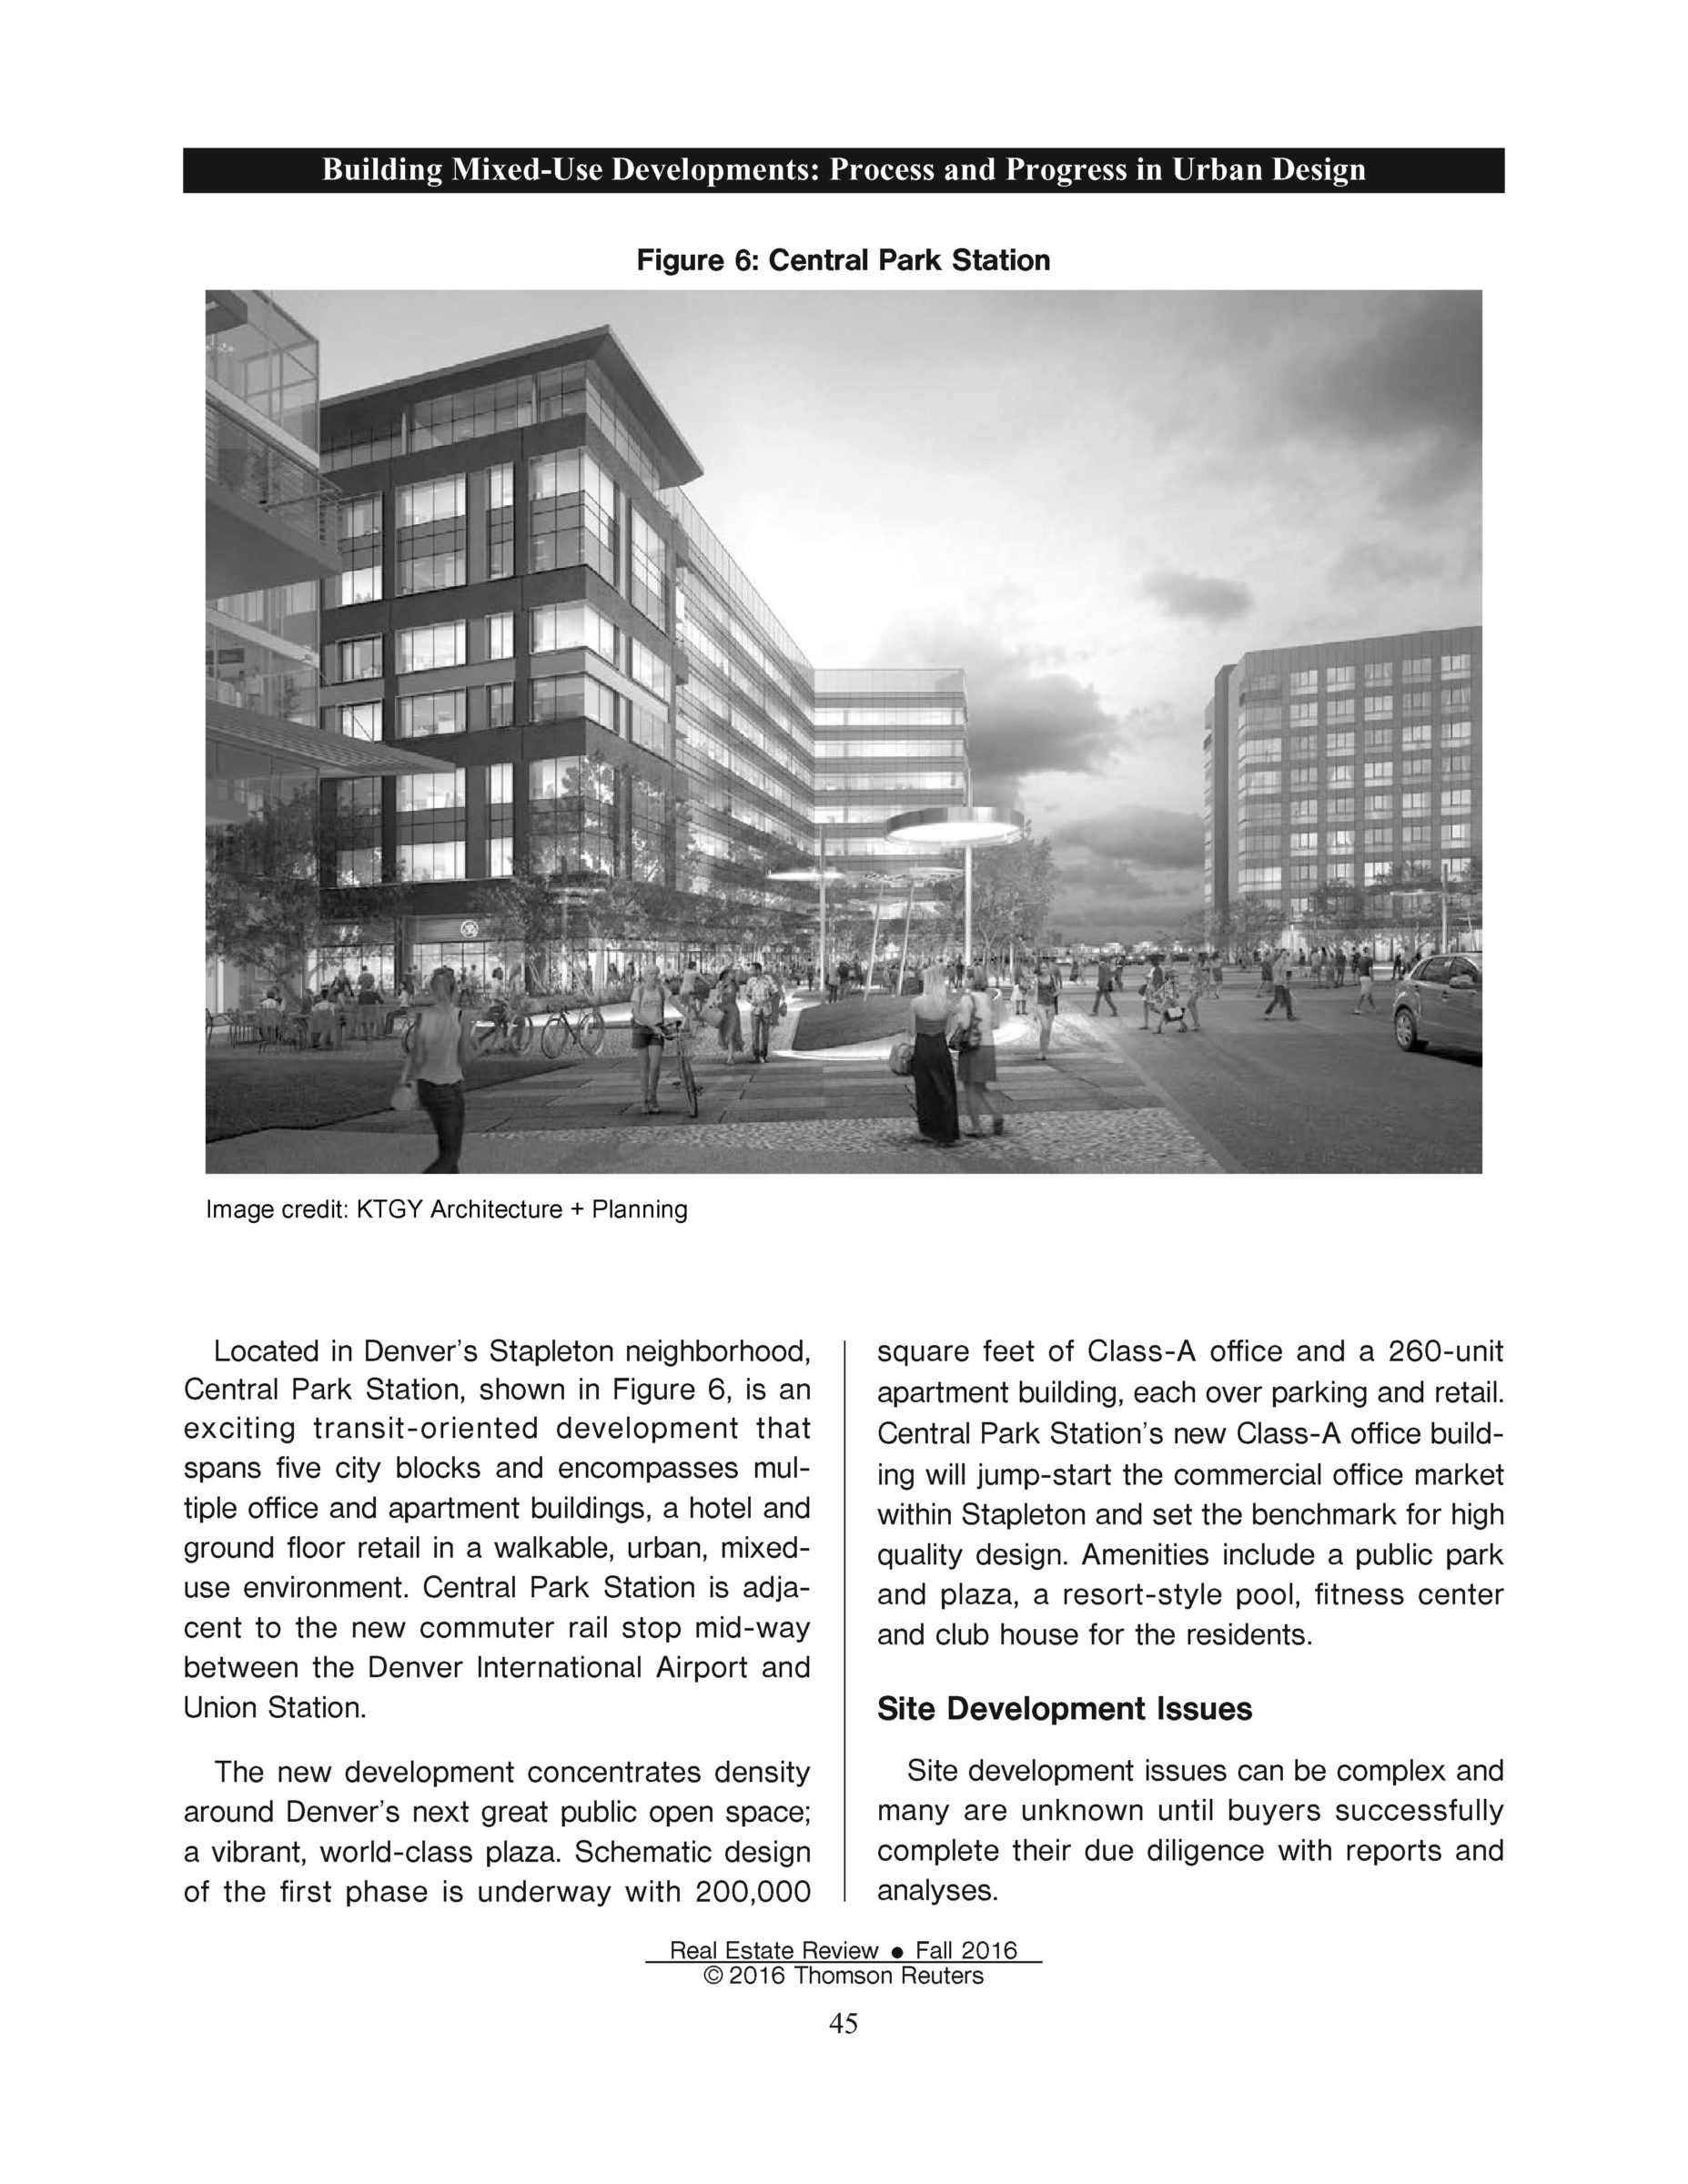 Real Estate Review (Building Mixed-Use Developments Process and Progress in Urban Design) 0916_Page_11